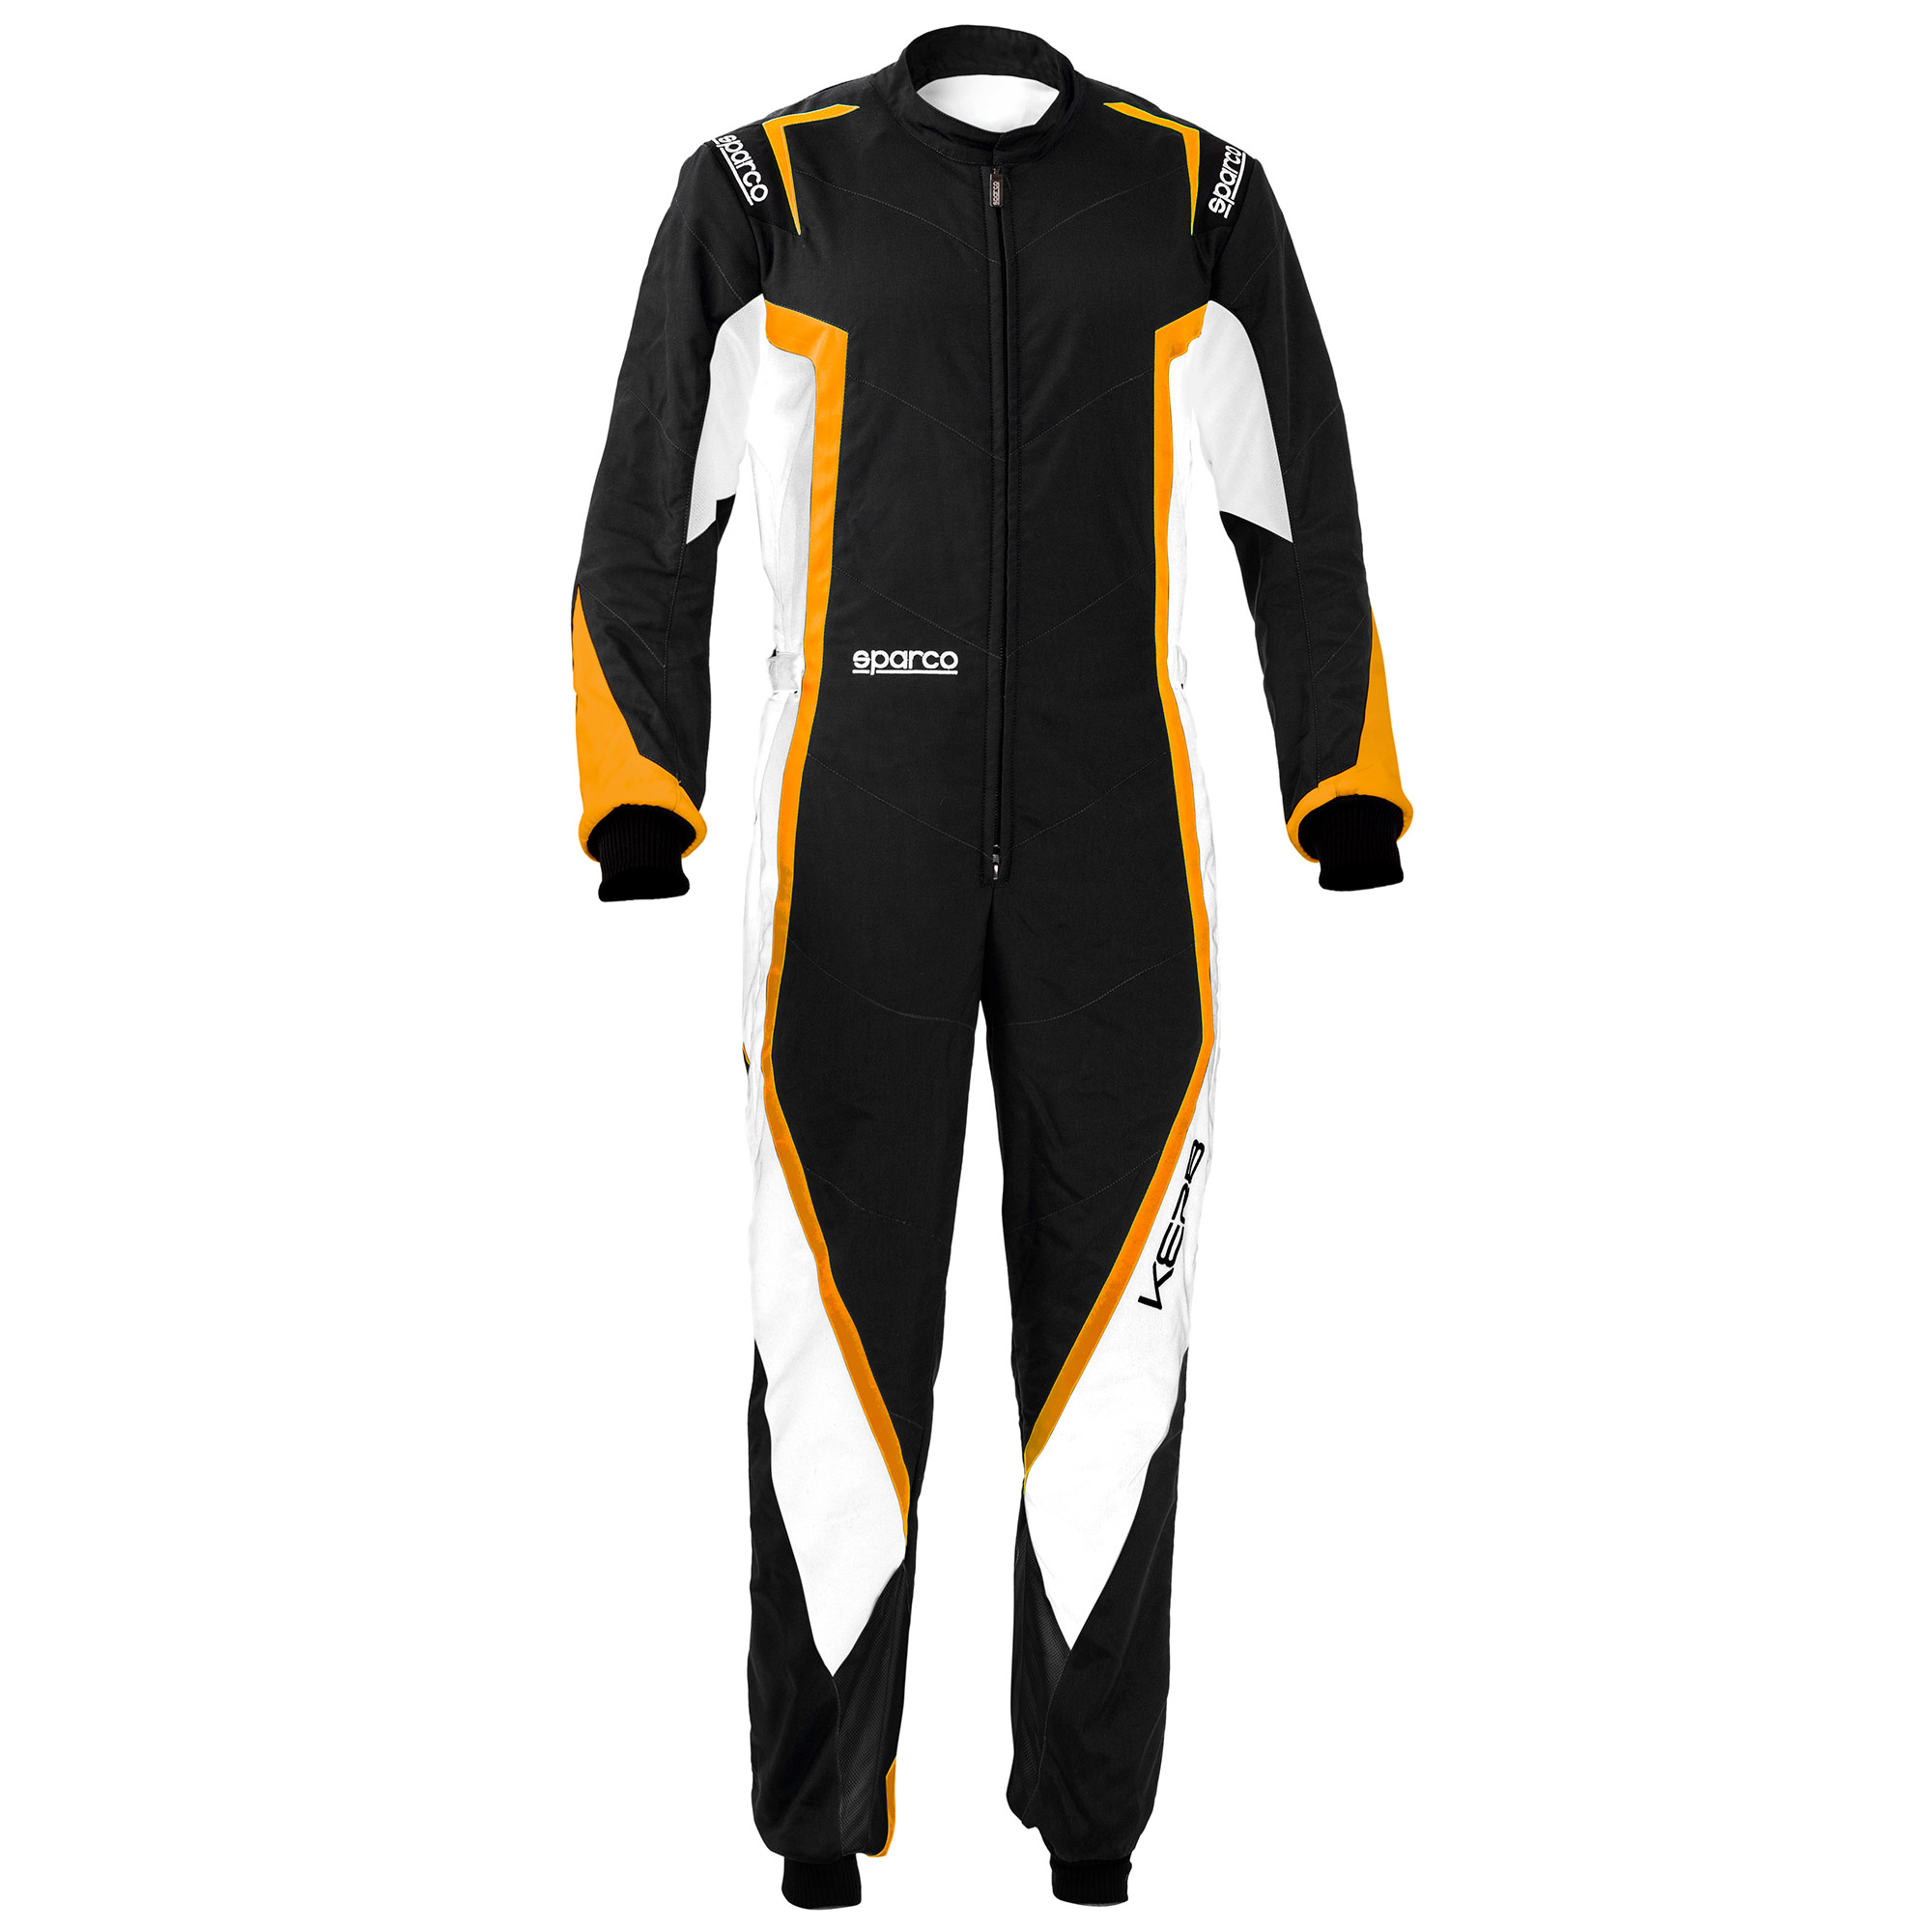 Go Kart Race Suit Sparco Black White Red Kart Racing Suit CIK FIA With Gifts 